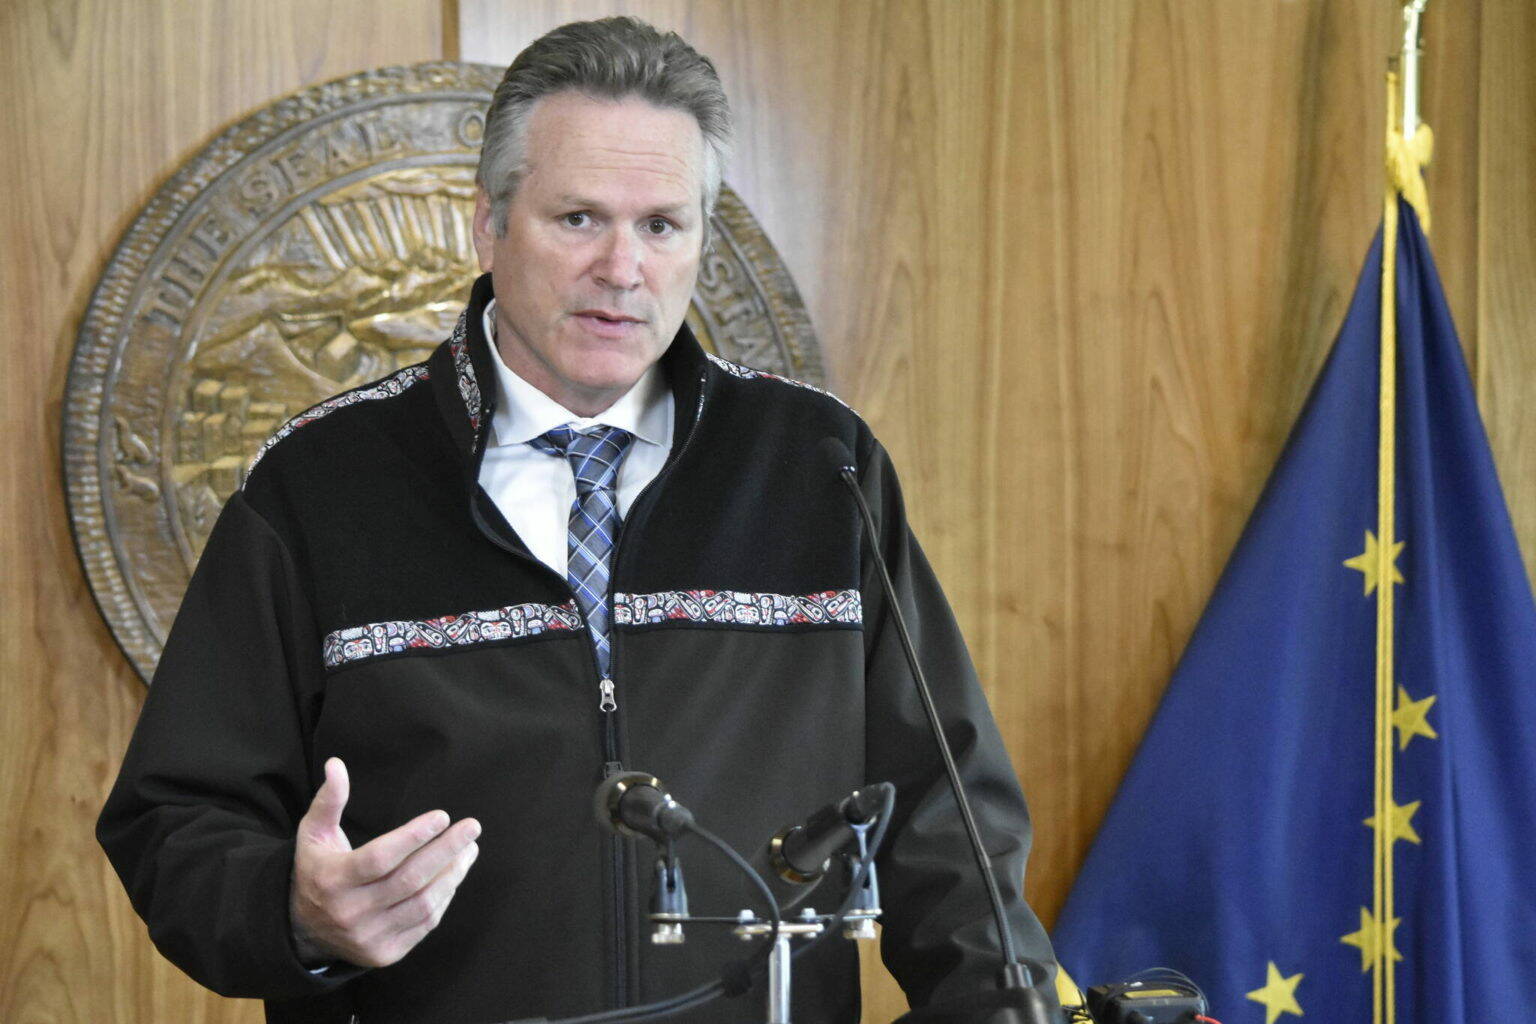 Gov. Mike Dunleavy speaks to a joint meeting of the Alaska State Legislature at the Alaska State Capitol on Tuesday, Jan. 25, 2022, for his fourth State of the State address of his administration. Dunleavy painted a positive picture for the state despite the challenges Alaska has faced during the COVID-19 pandemic and its effects on the economy. (Peter Segall / Juneau Empire)